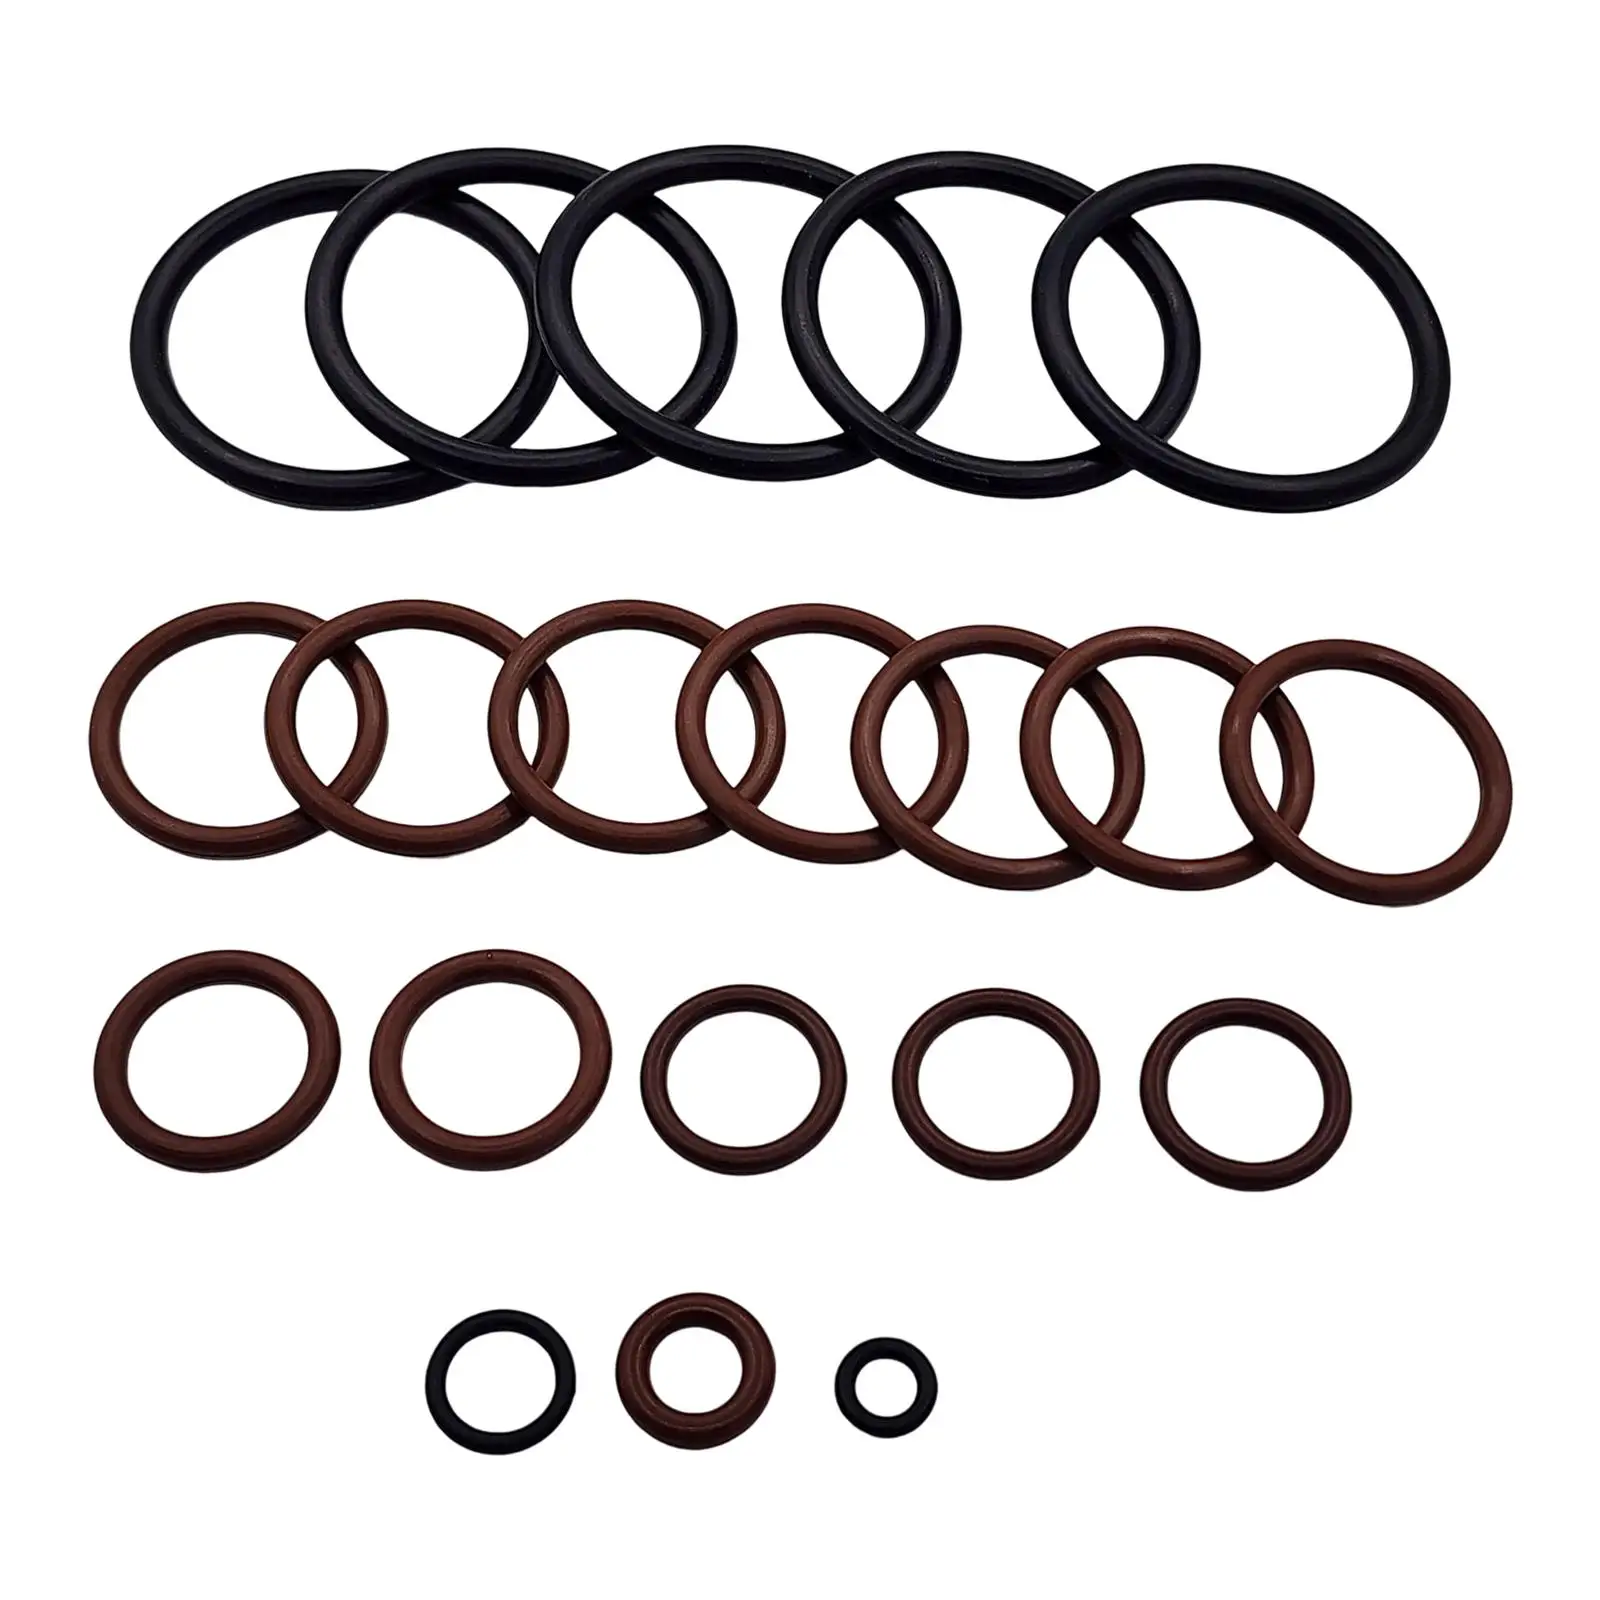 Cooling  Replacement Seals s Easy to or Gas Sealing Connections Professional for E46 M52 M54 Hose